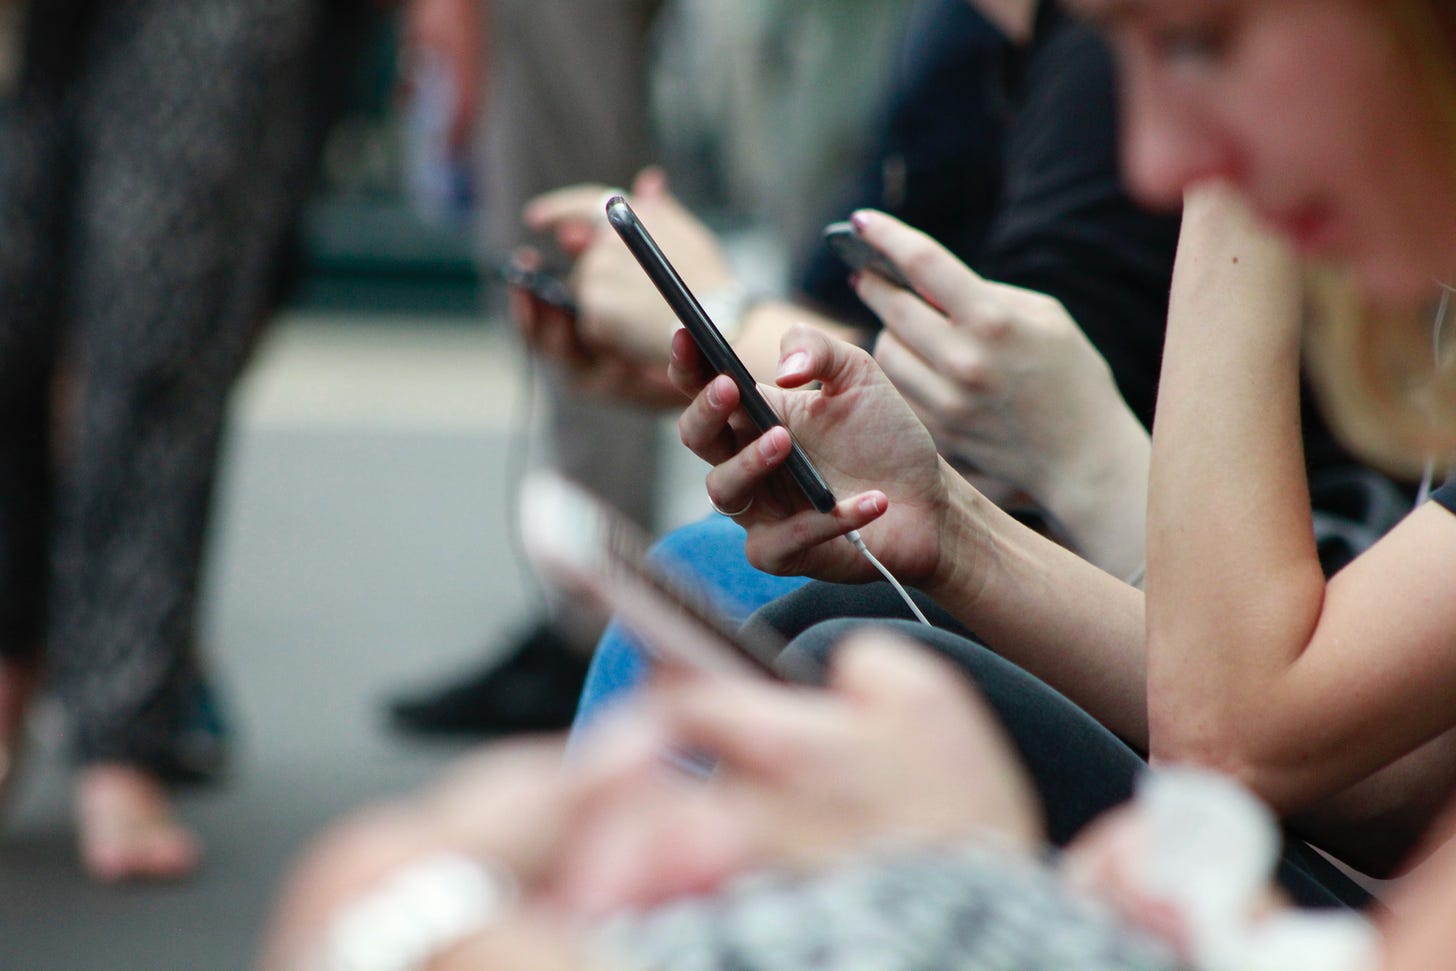 A soft focus image of hands holding smartphones, with people staring at their screens